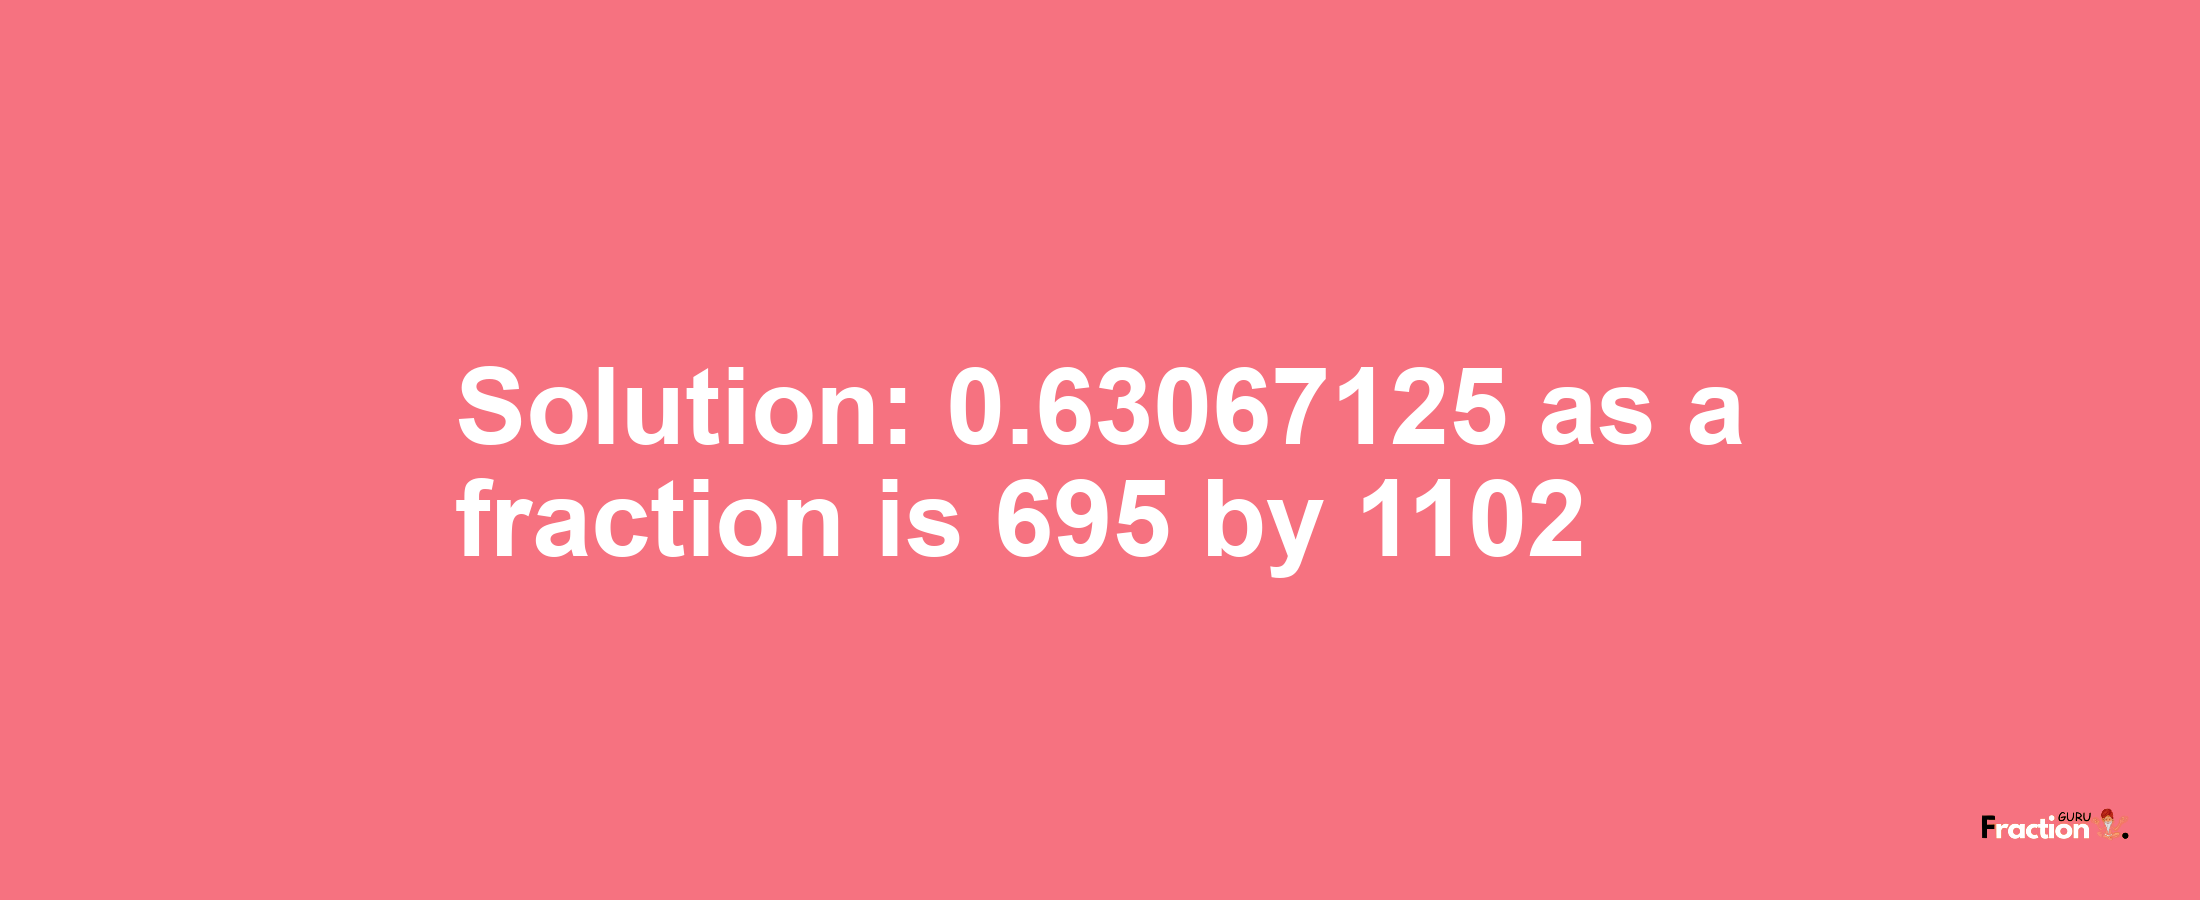 Solution:0.63067125 as a fraction is 695/1102